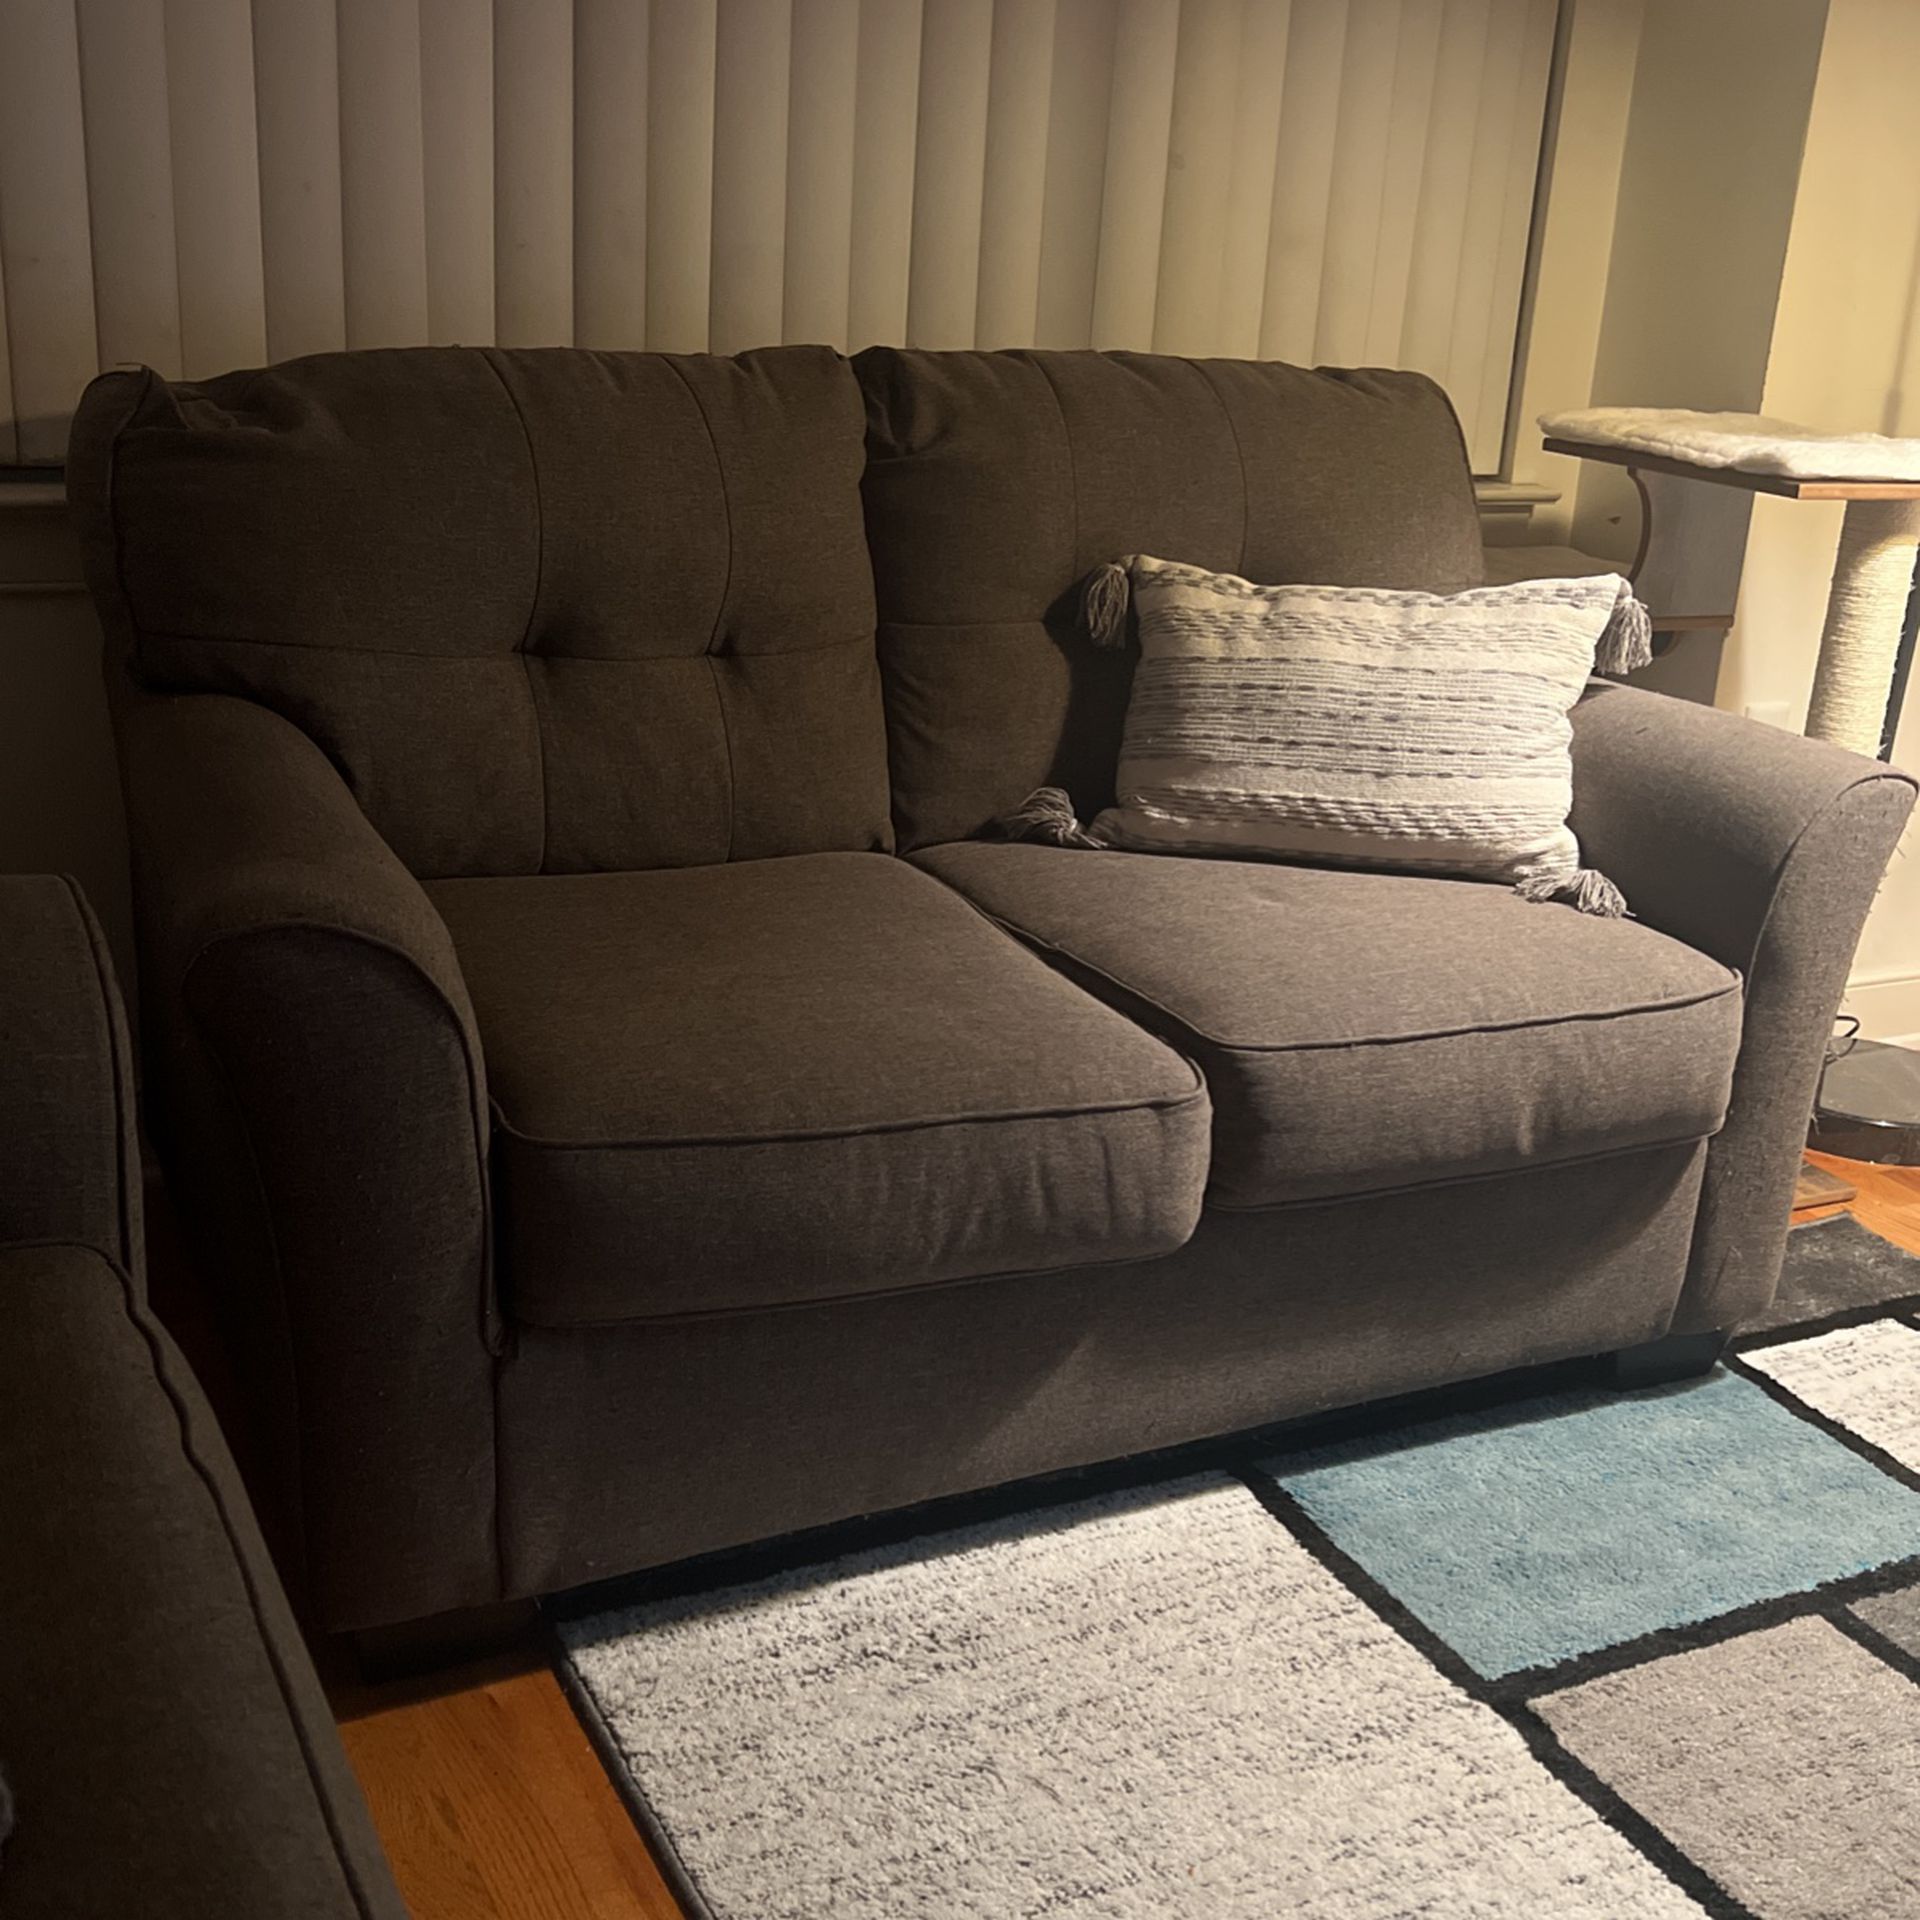 Gray Loveseat For Sale (Sofa / Couch)